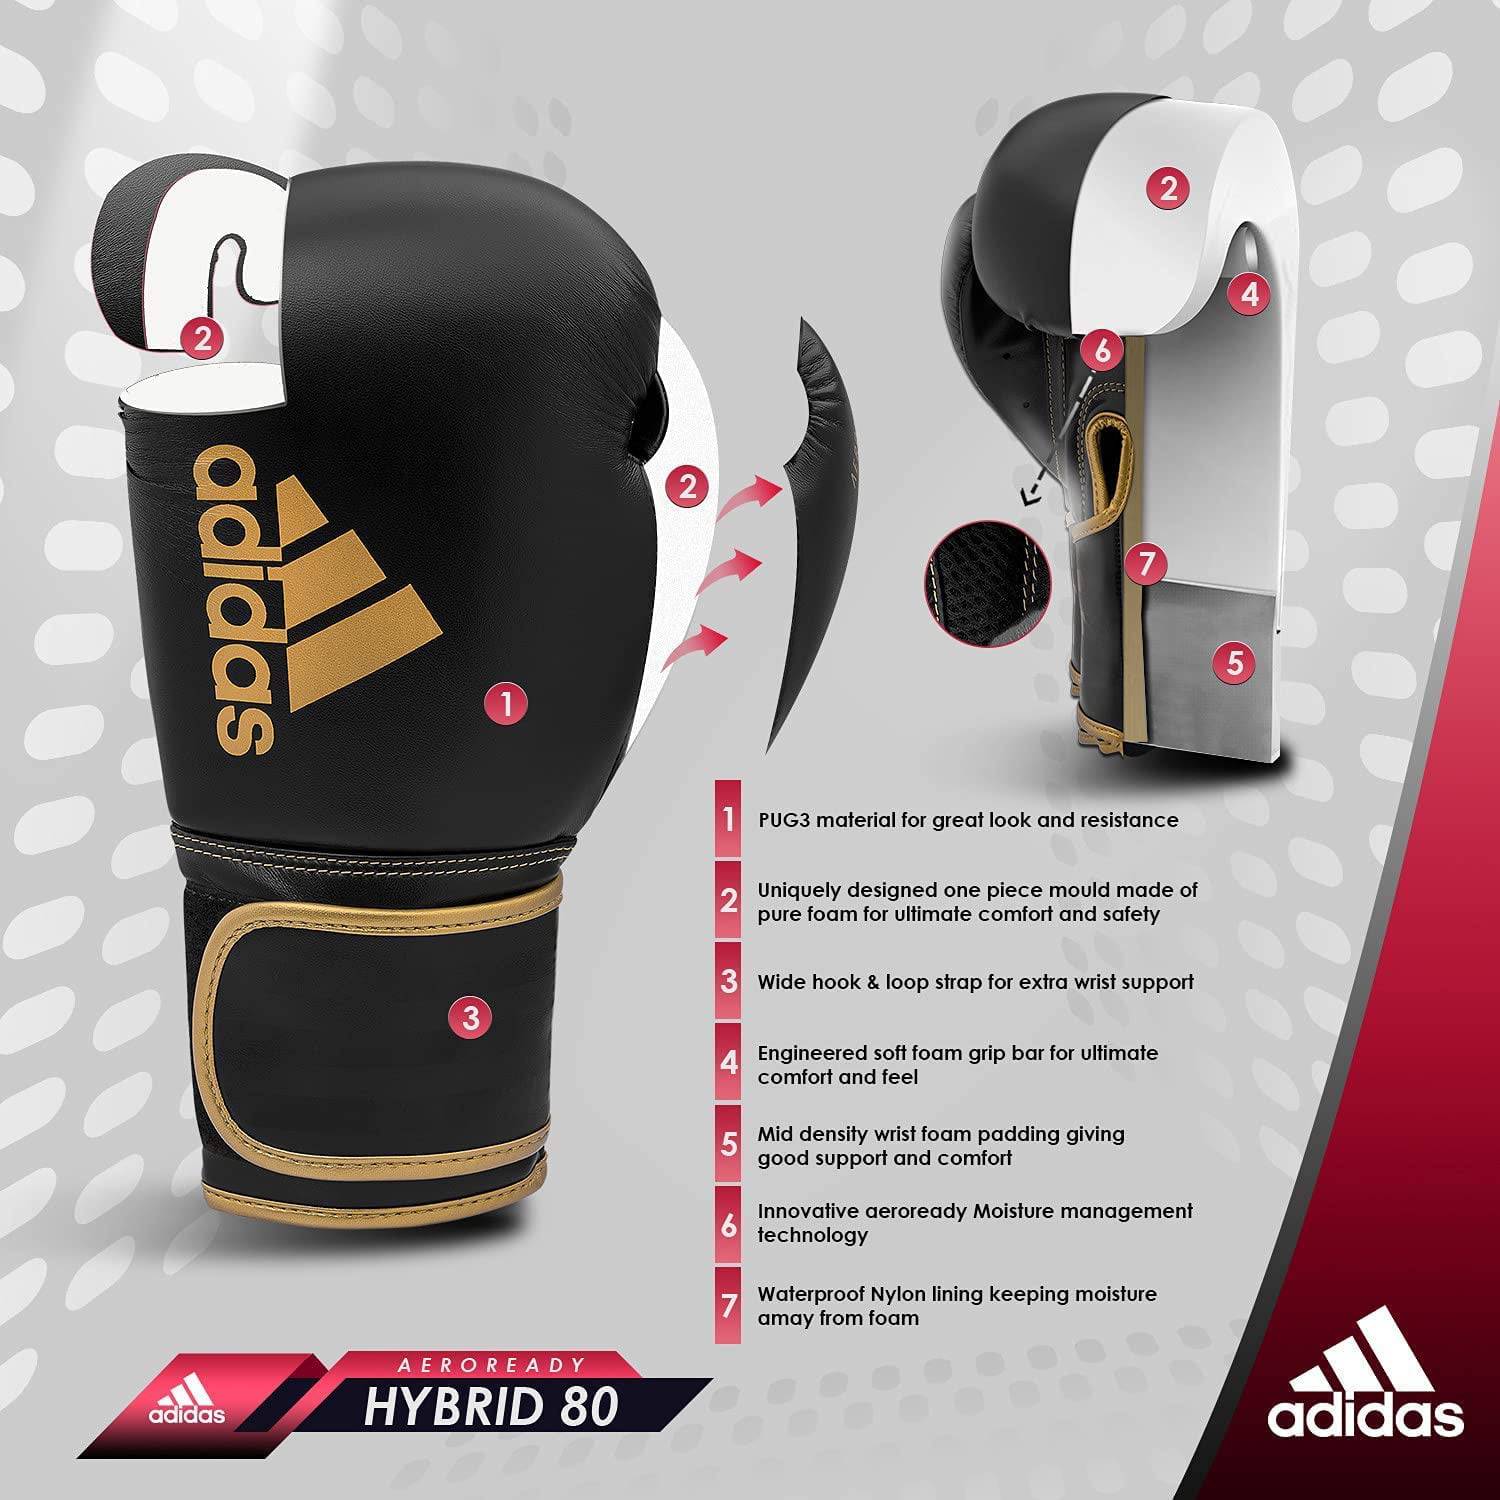 Training, 80 Women Hybrid and for Kickboxing, Black Boxing, for Bag, Oz., and 6 Gloves, Boxing Adidas Men